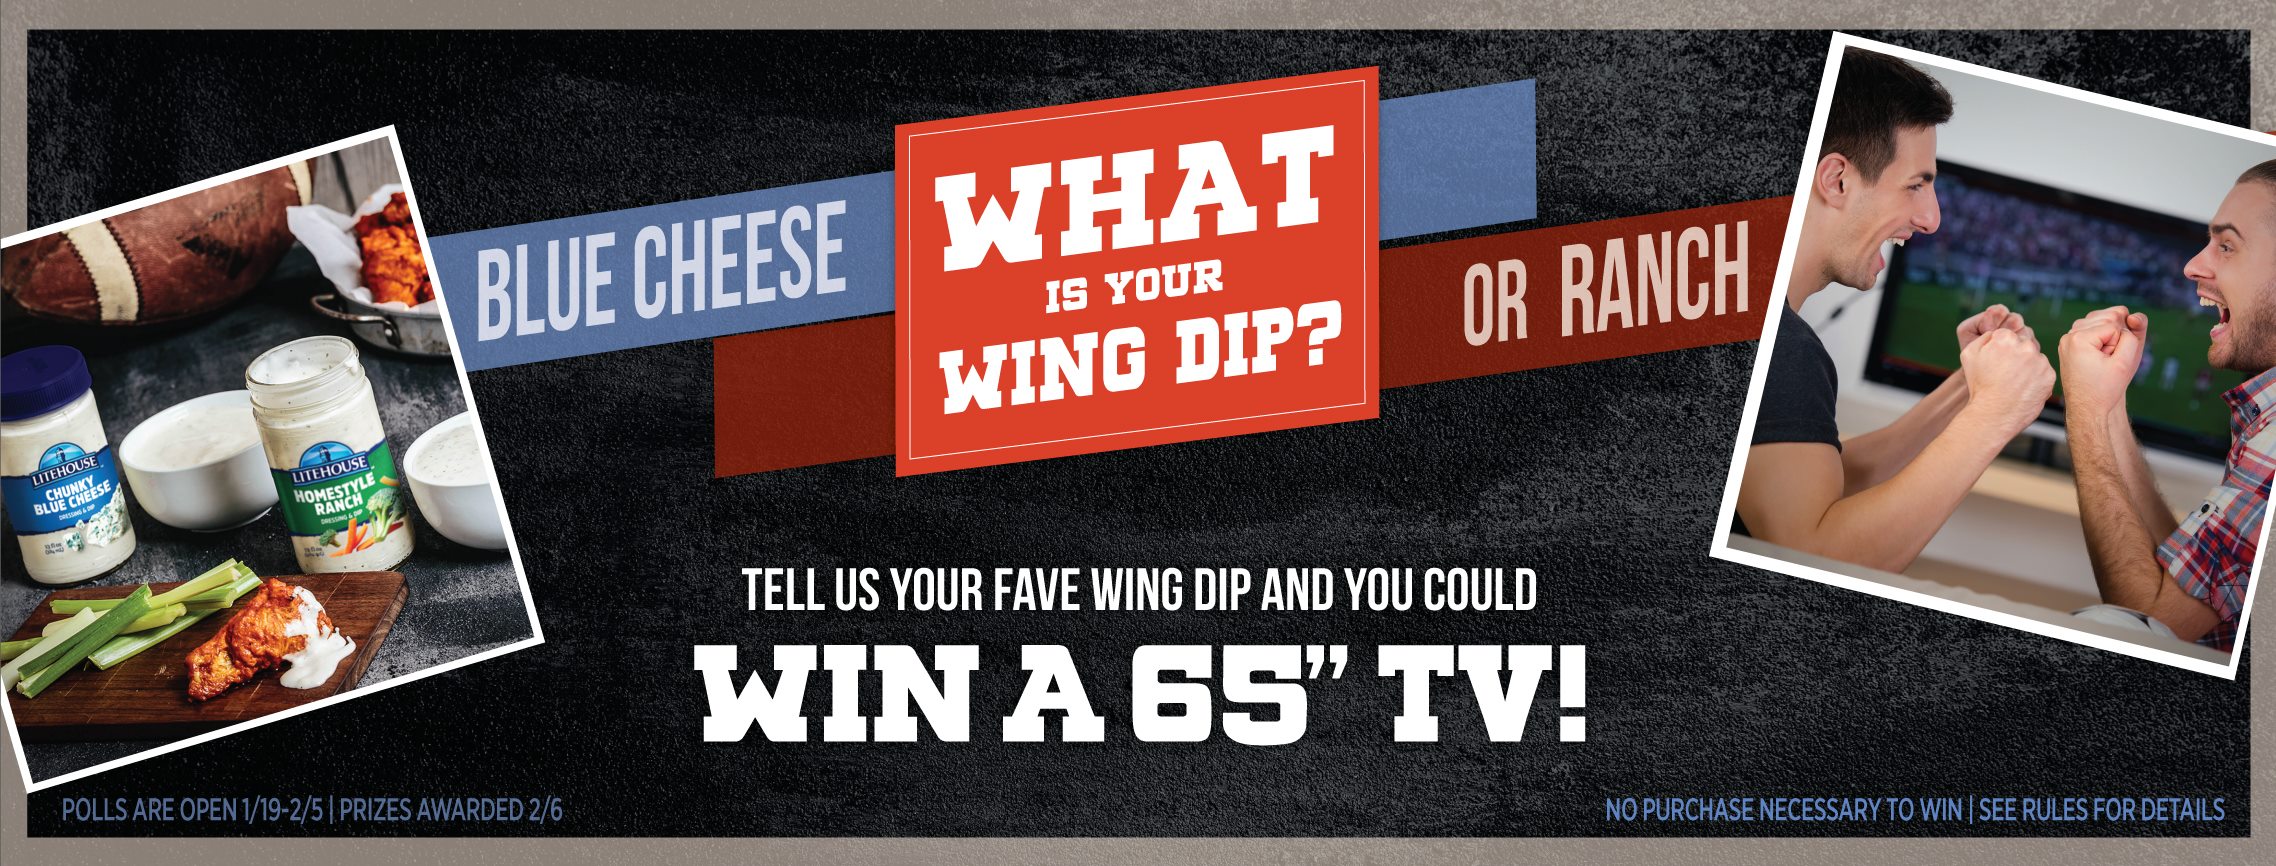 Wings are hot, but there's nothing better than dipping them into refreshing cool ranch or blue cheese. Except maybe when you're eating them while watching a game on the NEW flat screen TV that you just won! Tell us your dipping preference daily, and enter to win yourself a new 65" TV!